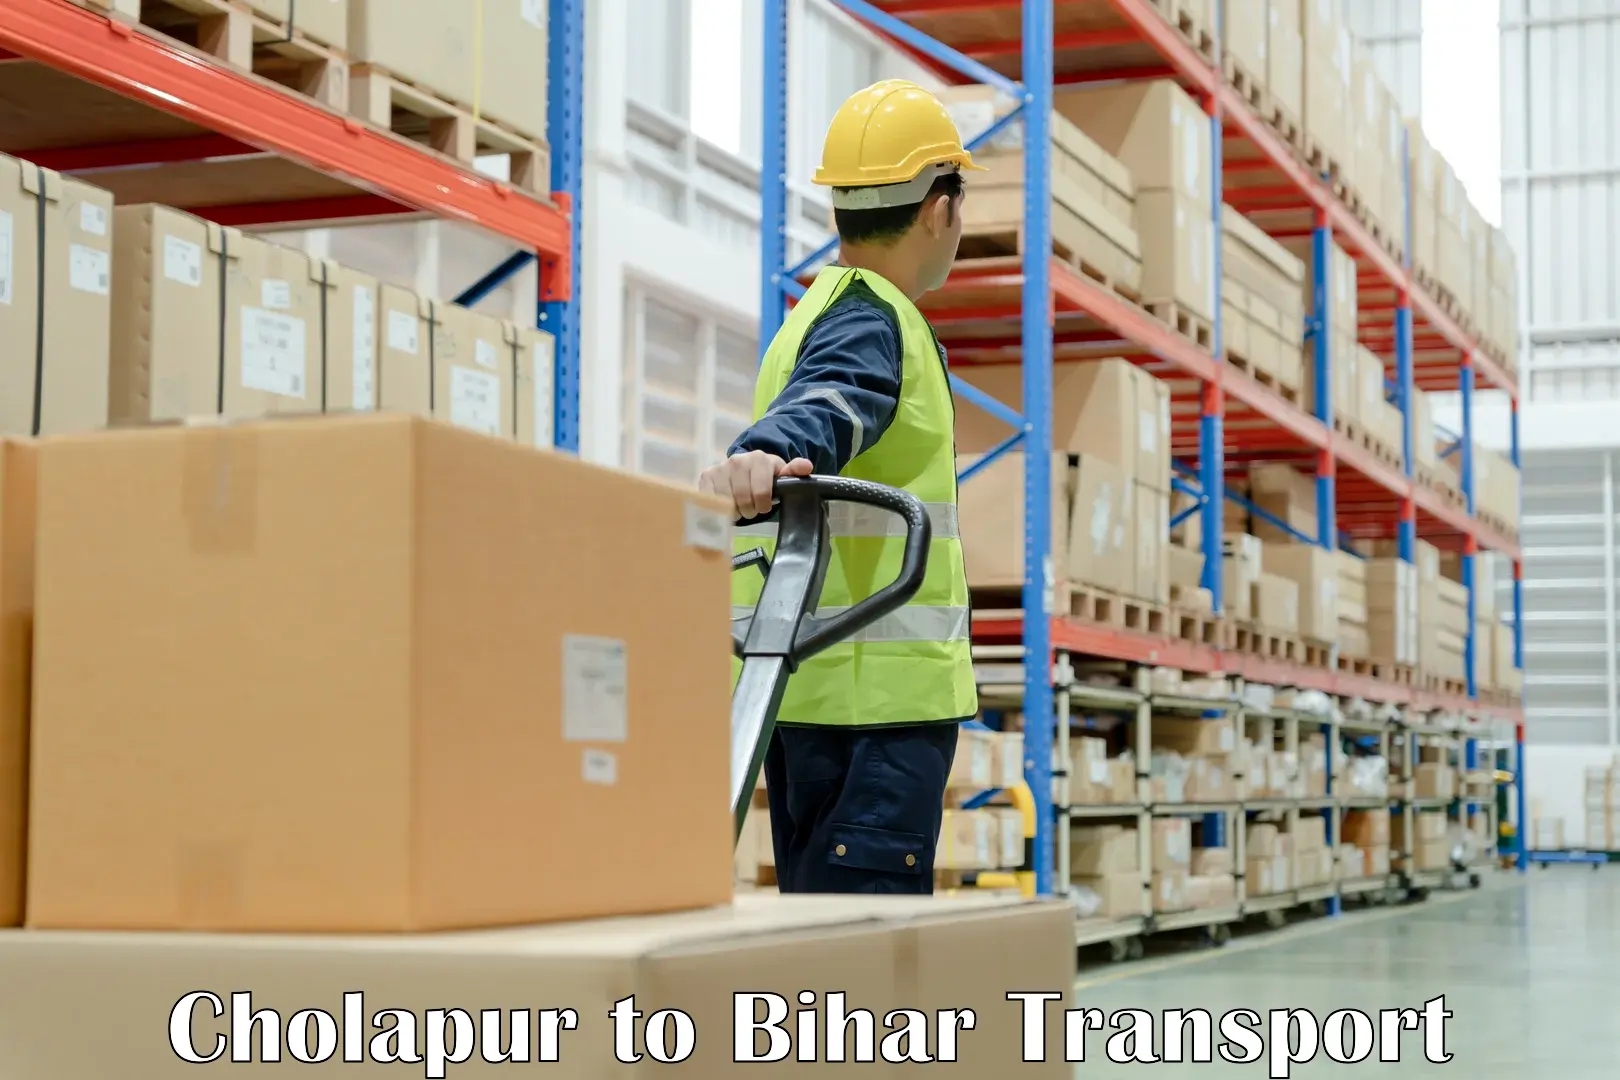 Delivery service Cholapur to Buxar